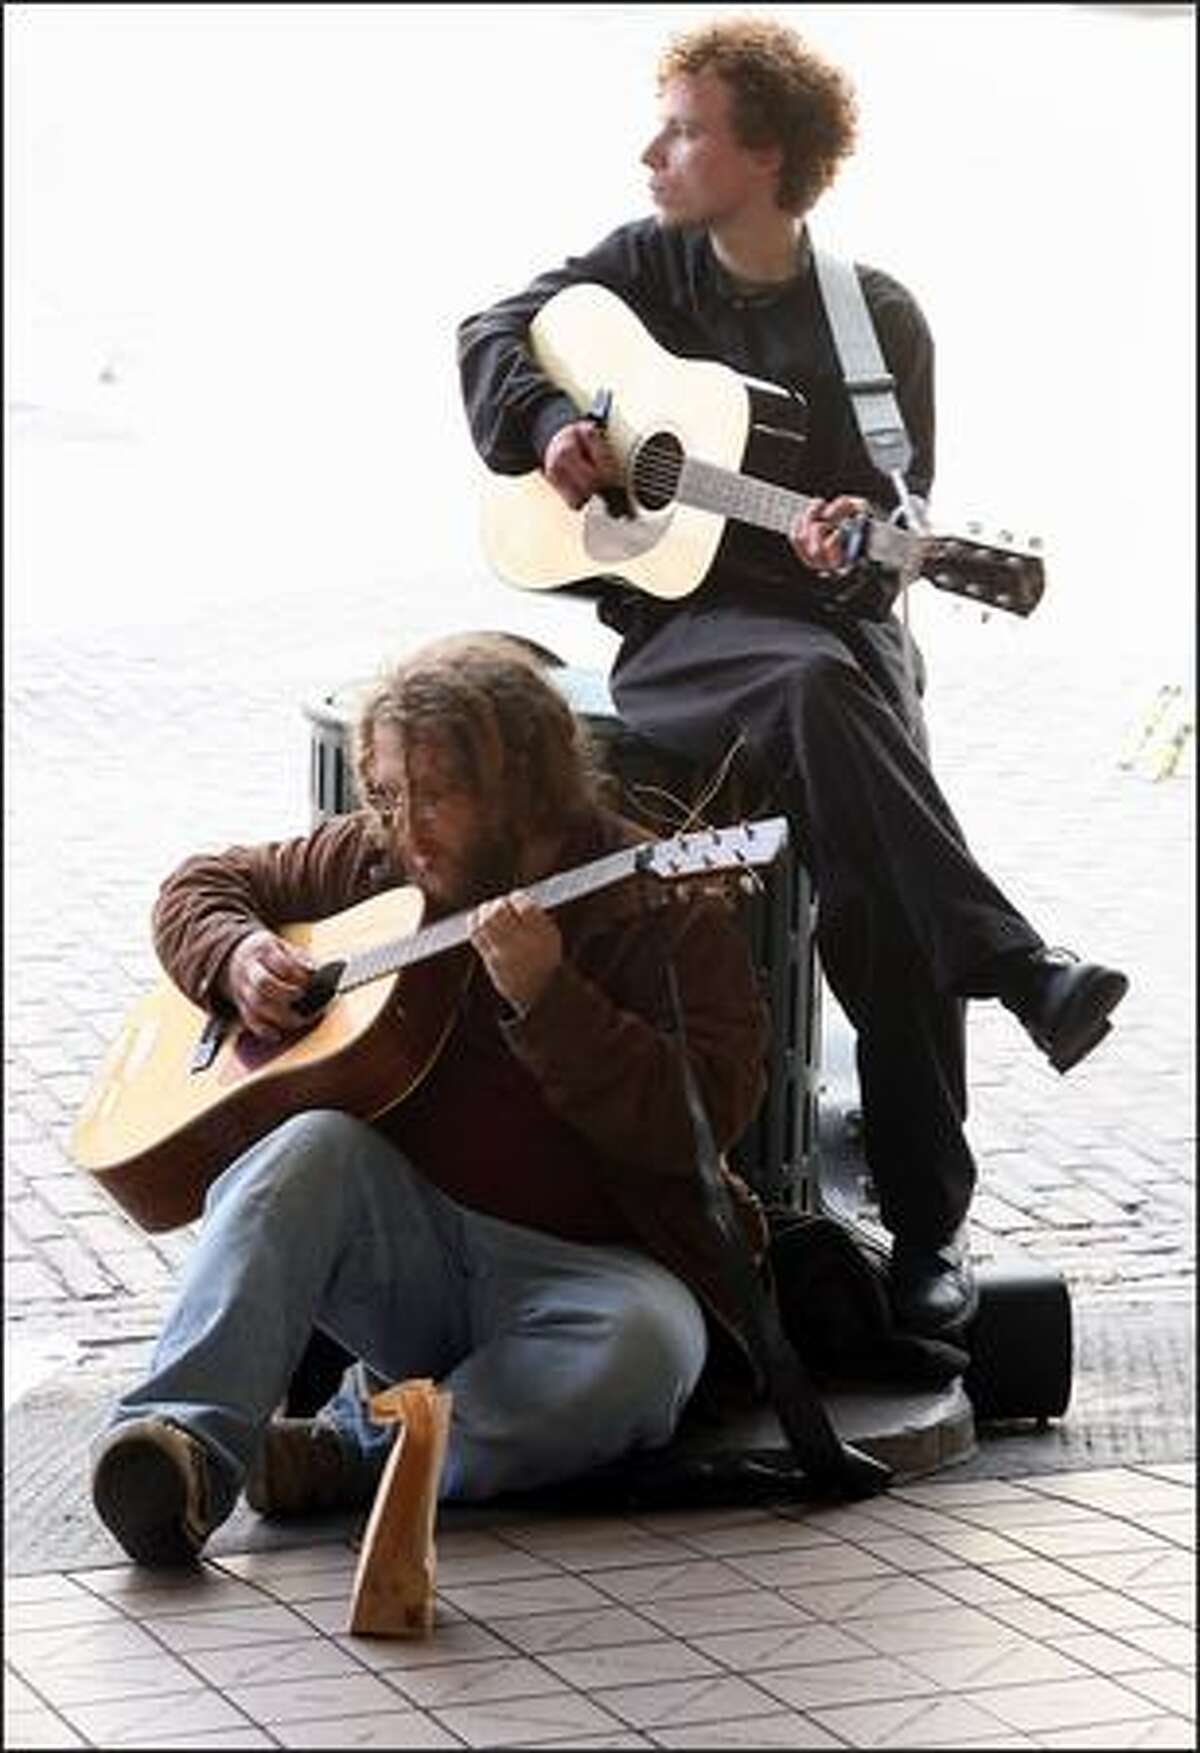 Street musicians Tommy Dean and Kind Kieth perfom at the Pike Place Market.